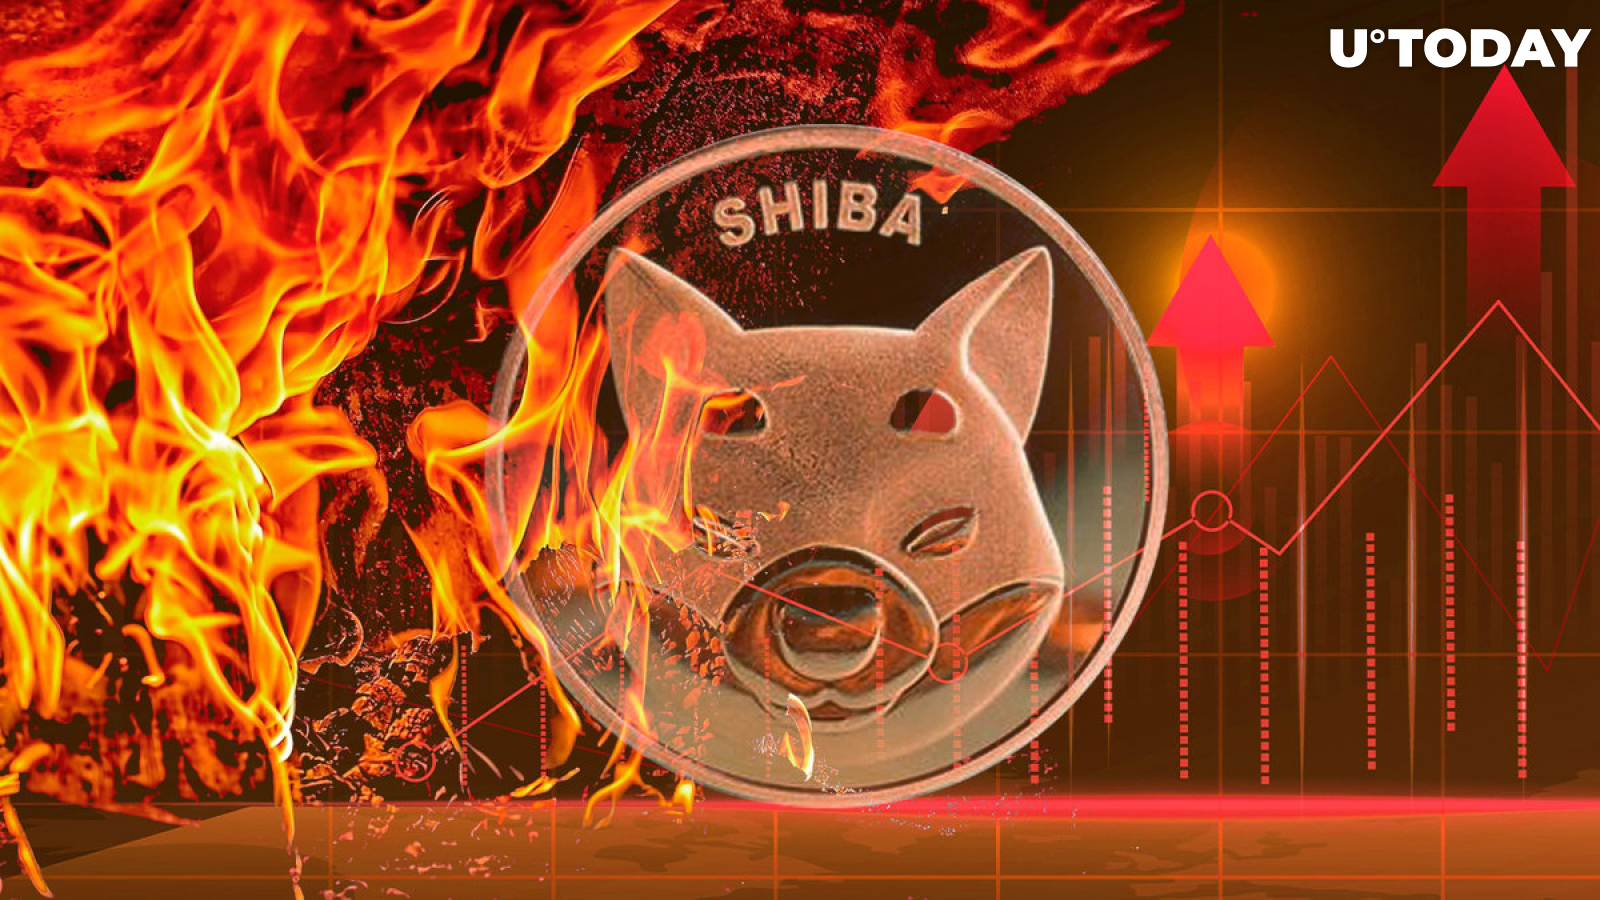 Shiba Inu Burn Rate Suddenly Jumps 322%, SHIB Price Approaches Key Support